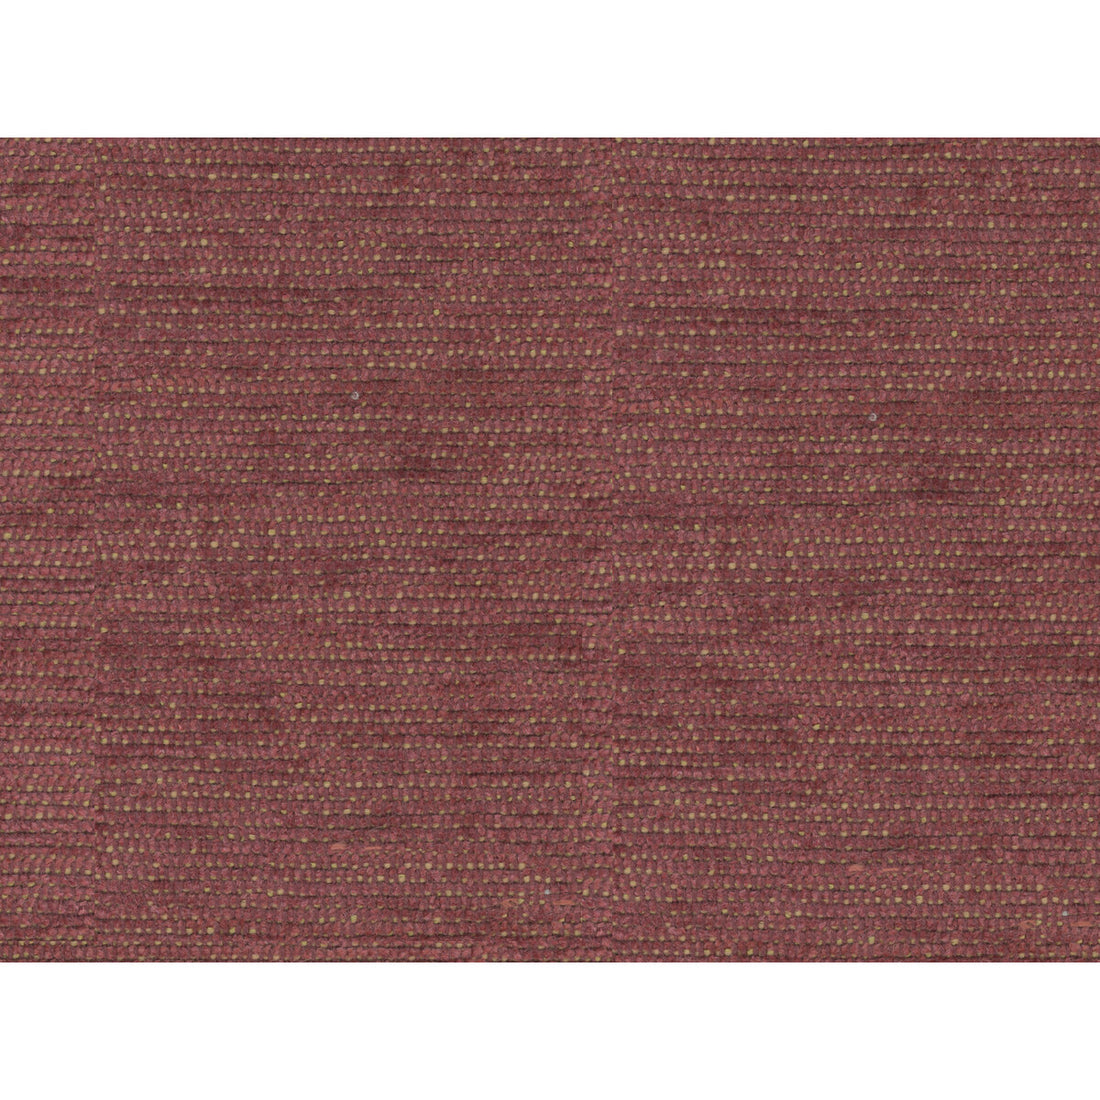 Revard Chenille fabric in wine color - pattern 8016107.9.0 - by Brunschwig &amp; Fils in the Chambery Textures collection